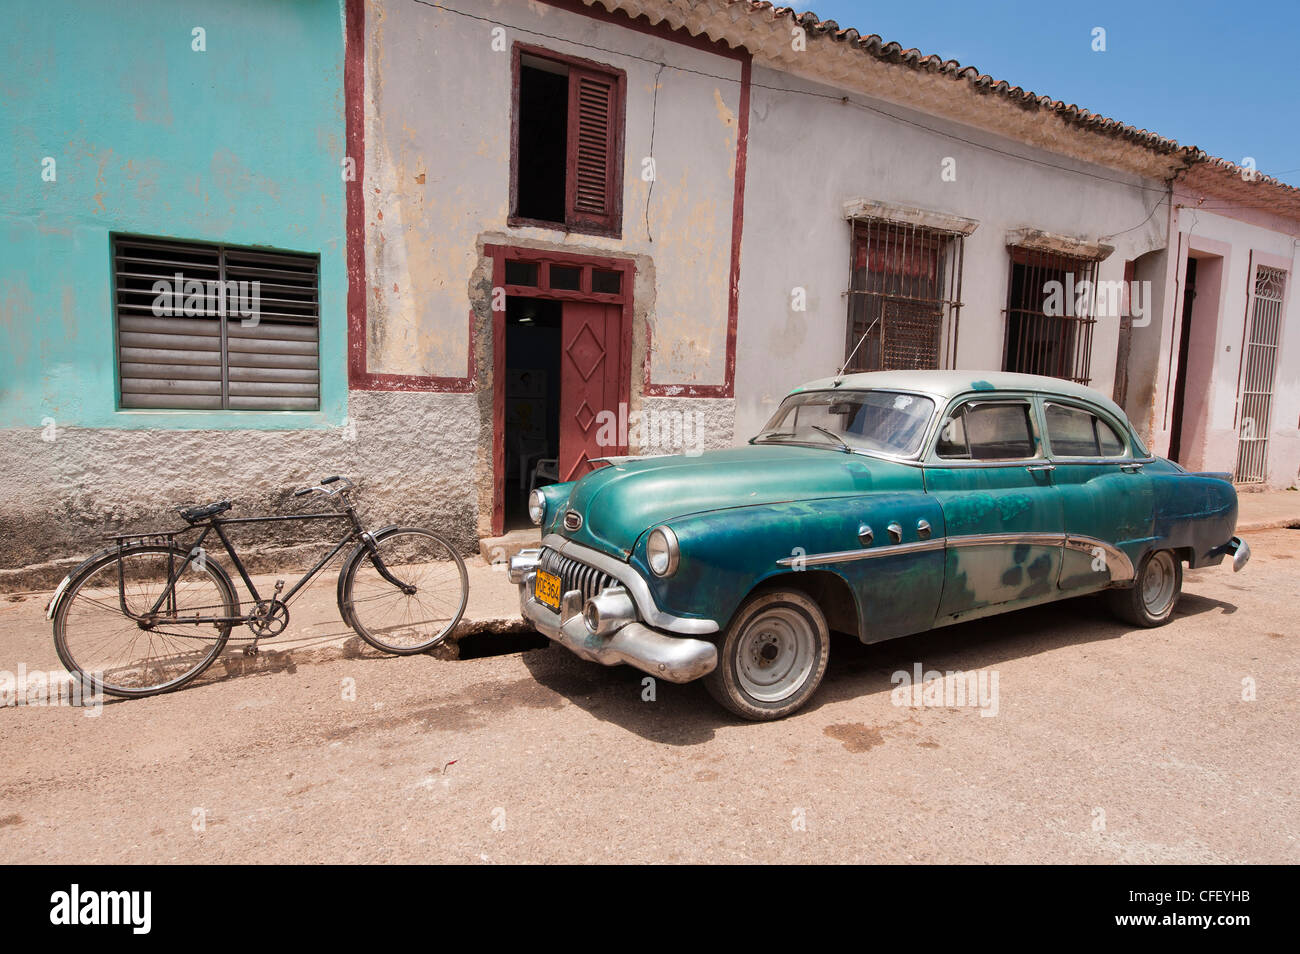 Old 1950s car, Remedios, Cuba, West Indies, Central America Stock Photo